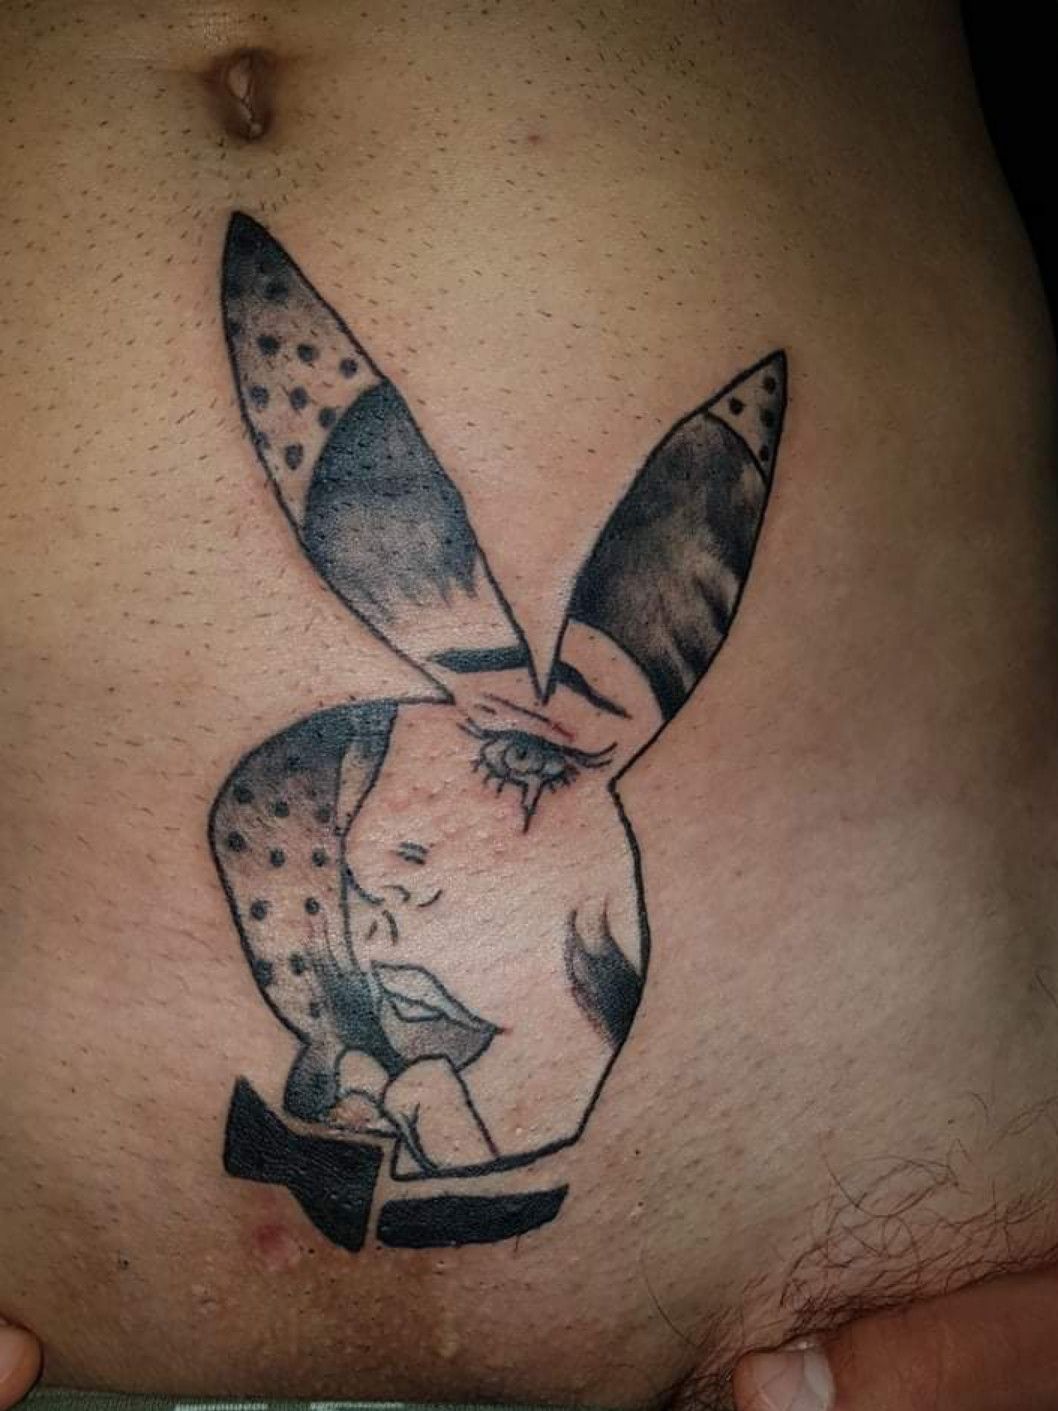 Slideshow porn star with playboy bunny tattoo on small of back.